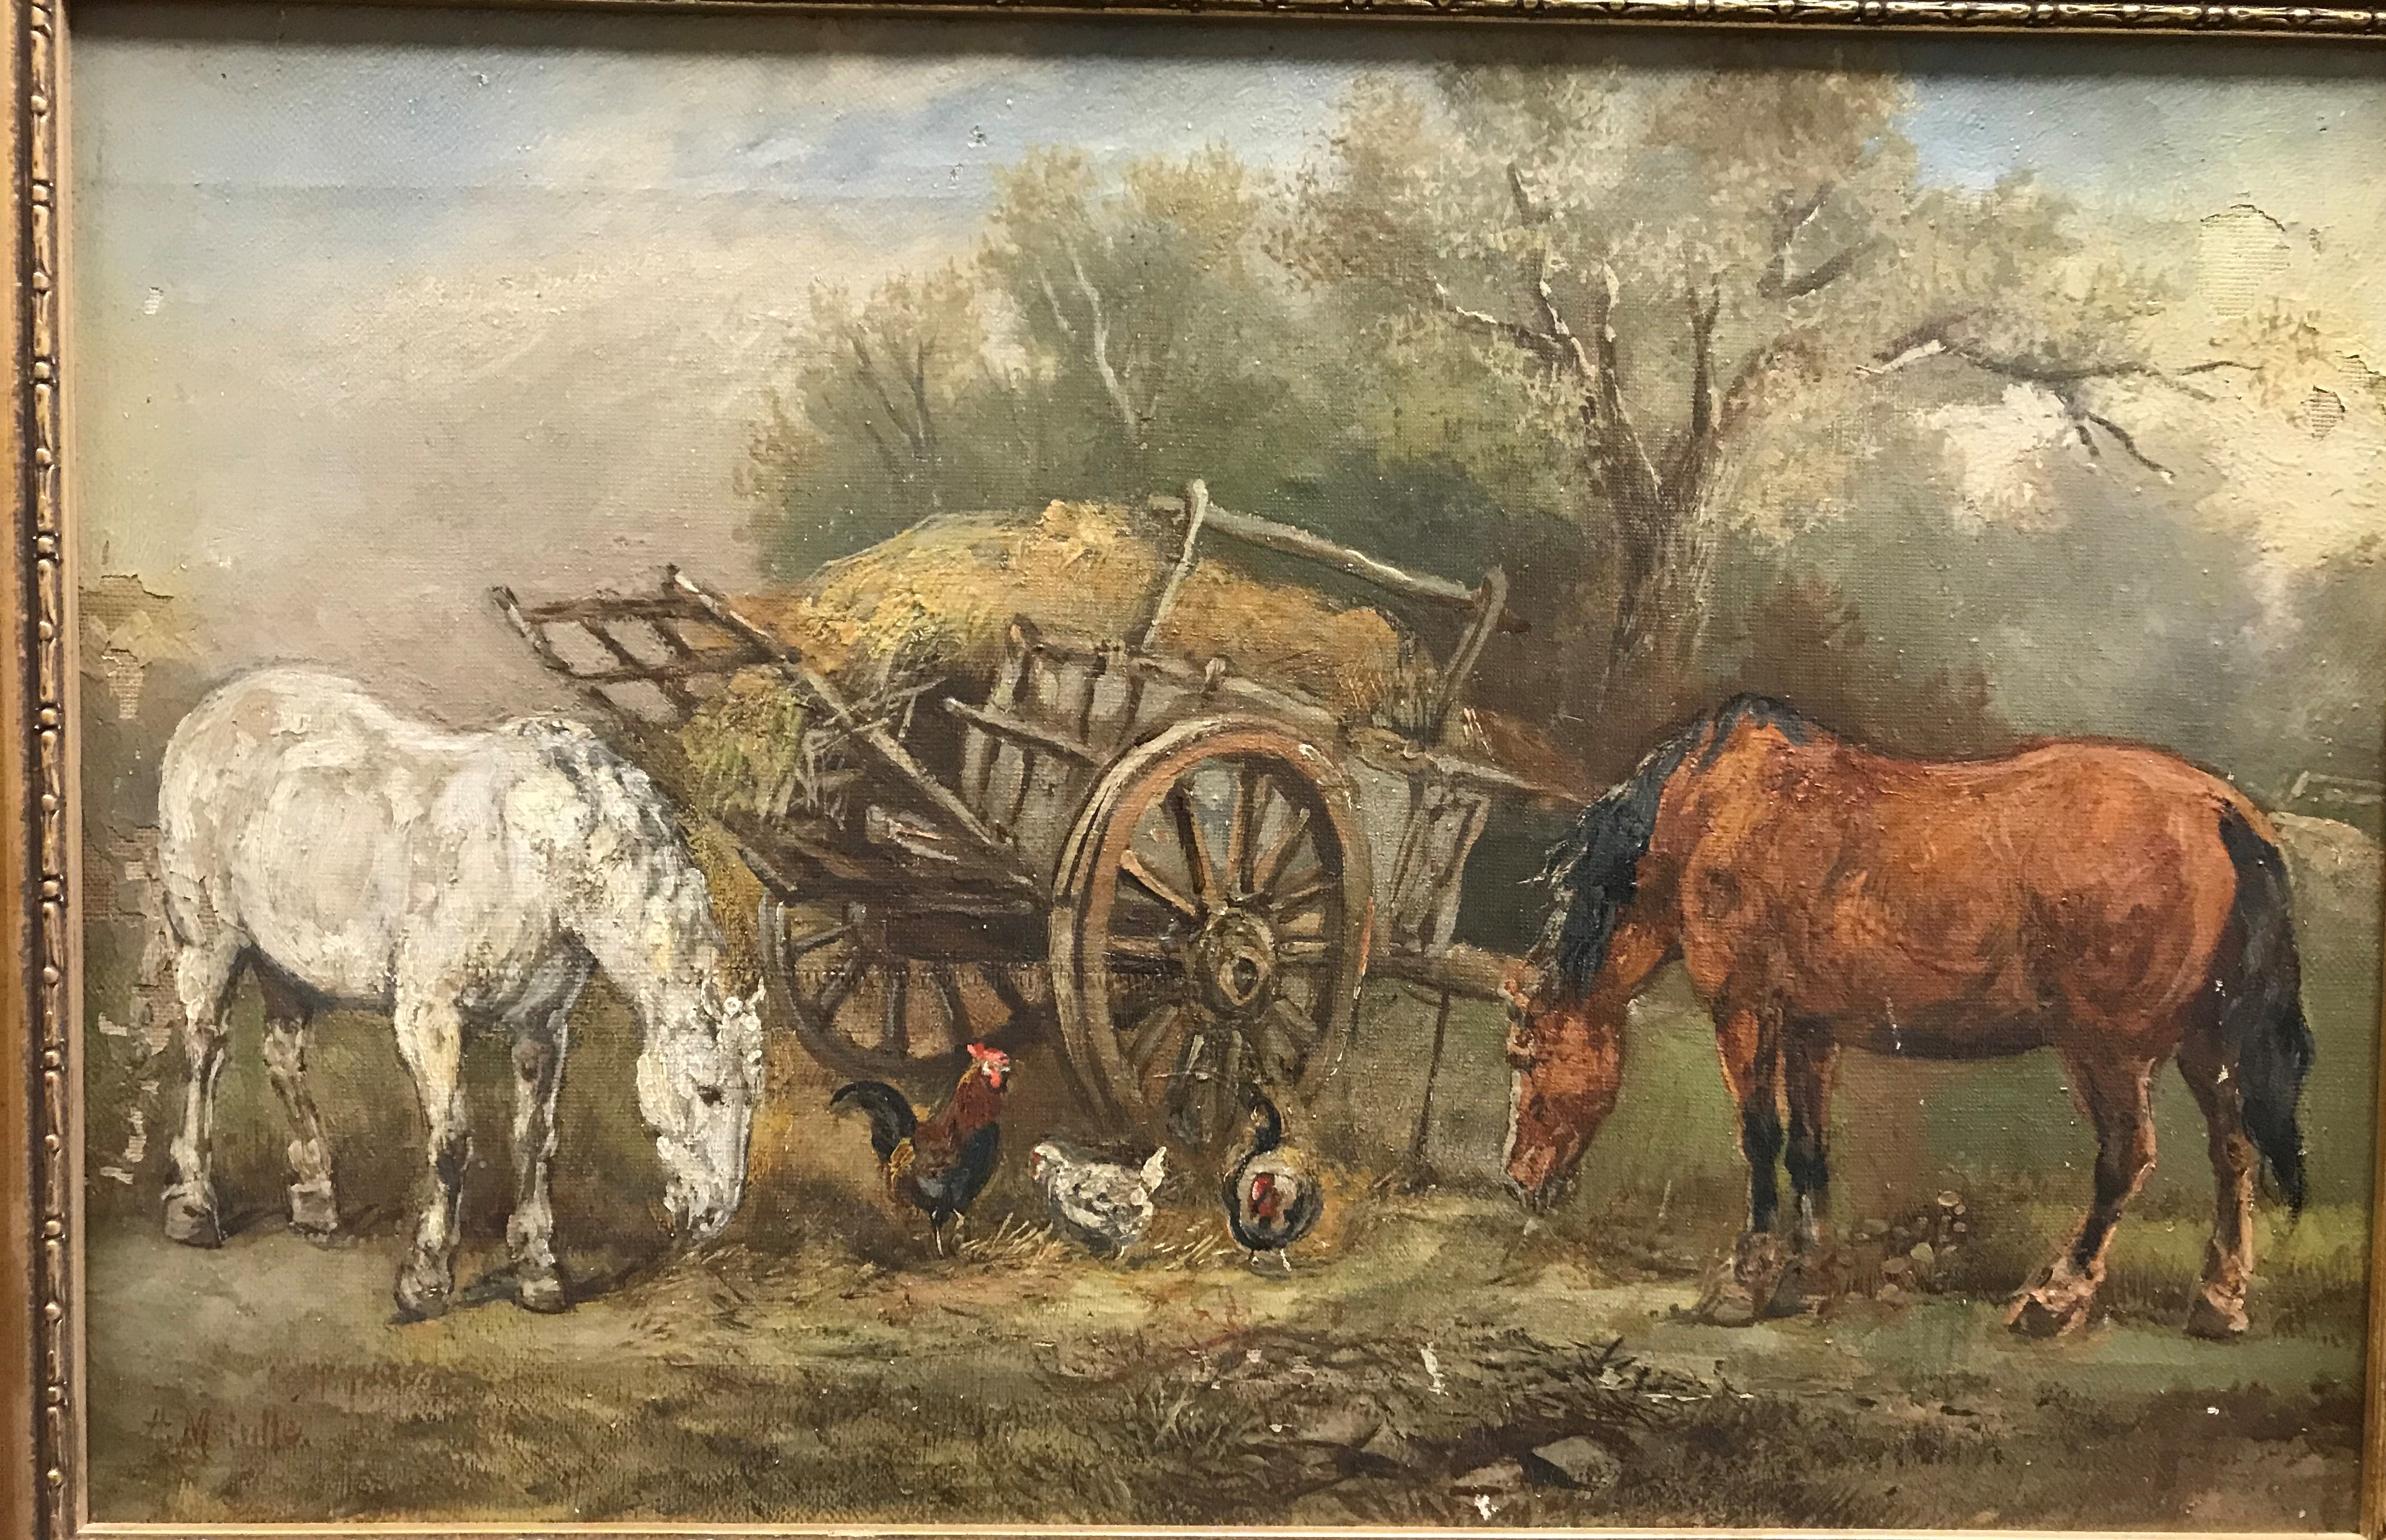 ARDEN SIDNEY MELVILLE (1847-1881) "Cart, two horses and chickens", oil on canvas, signed lower left, - Image 2 of 2